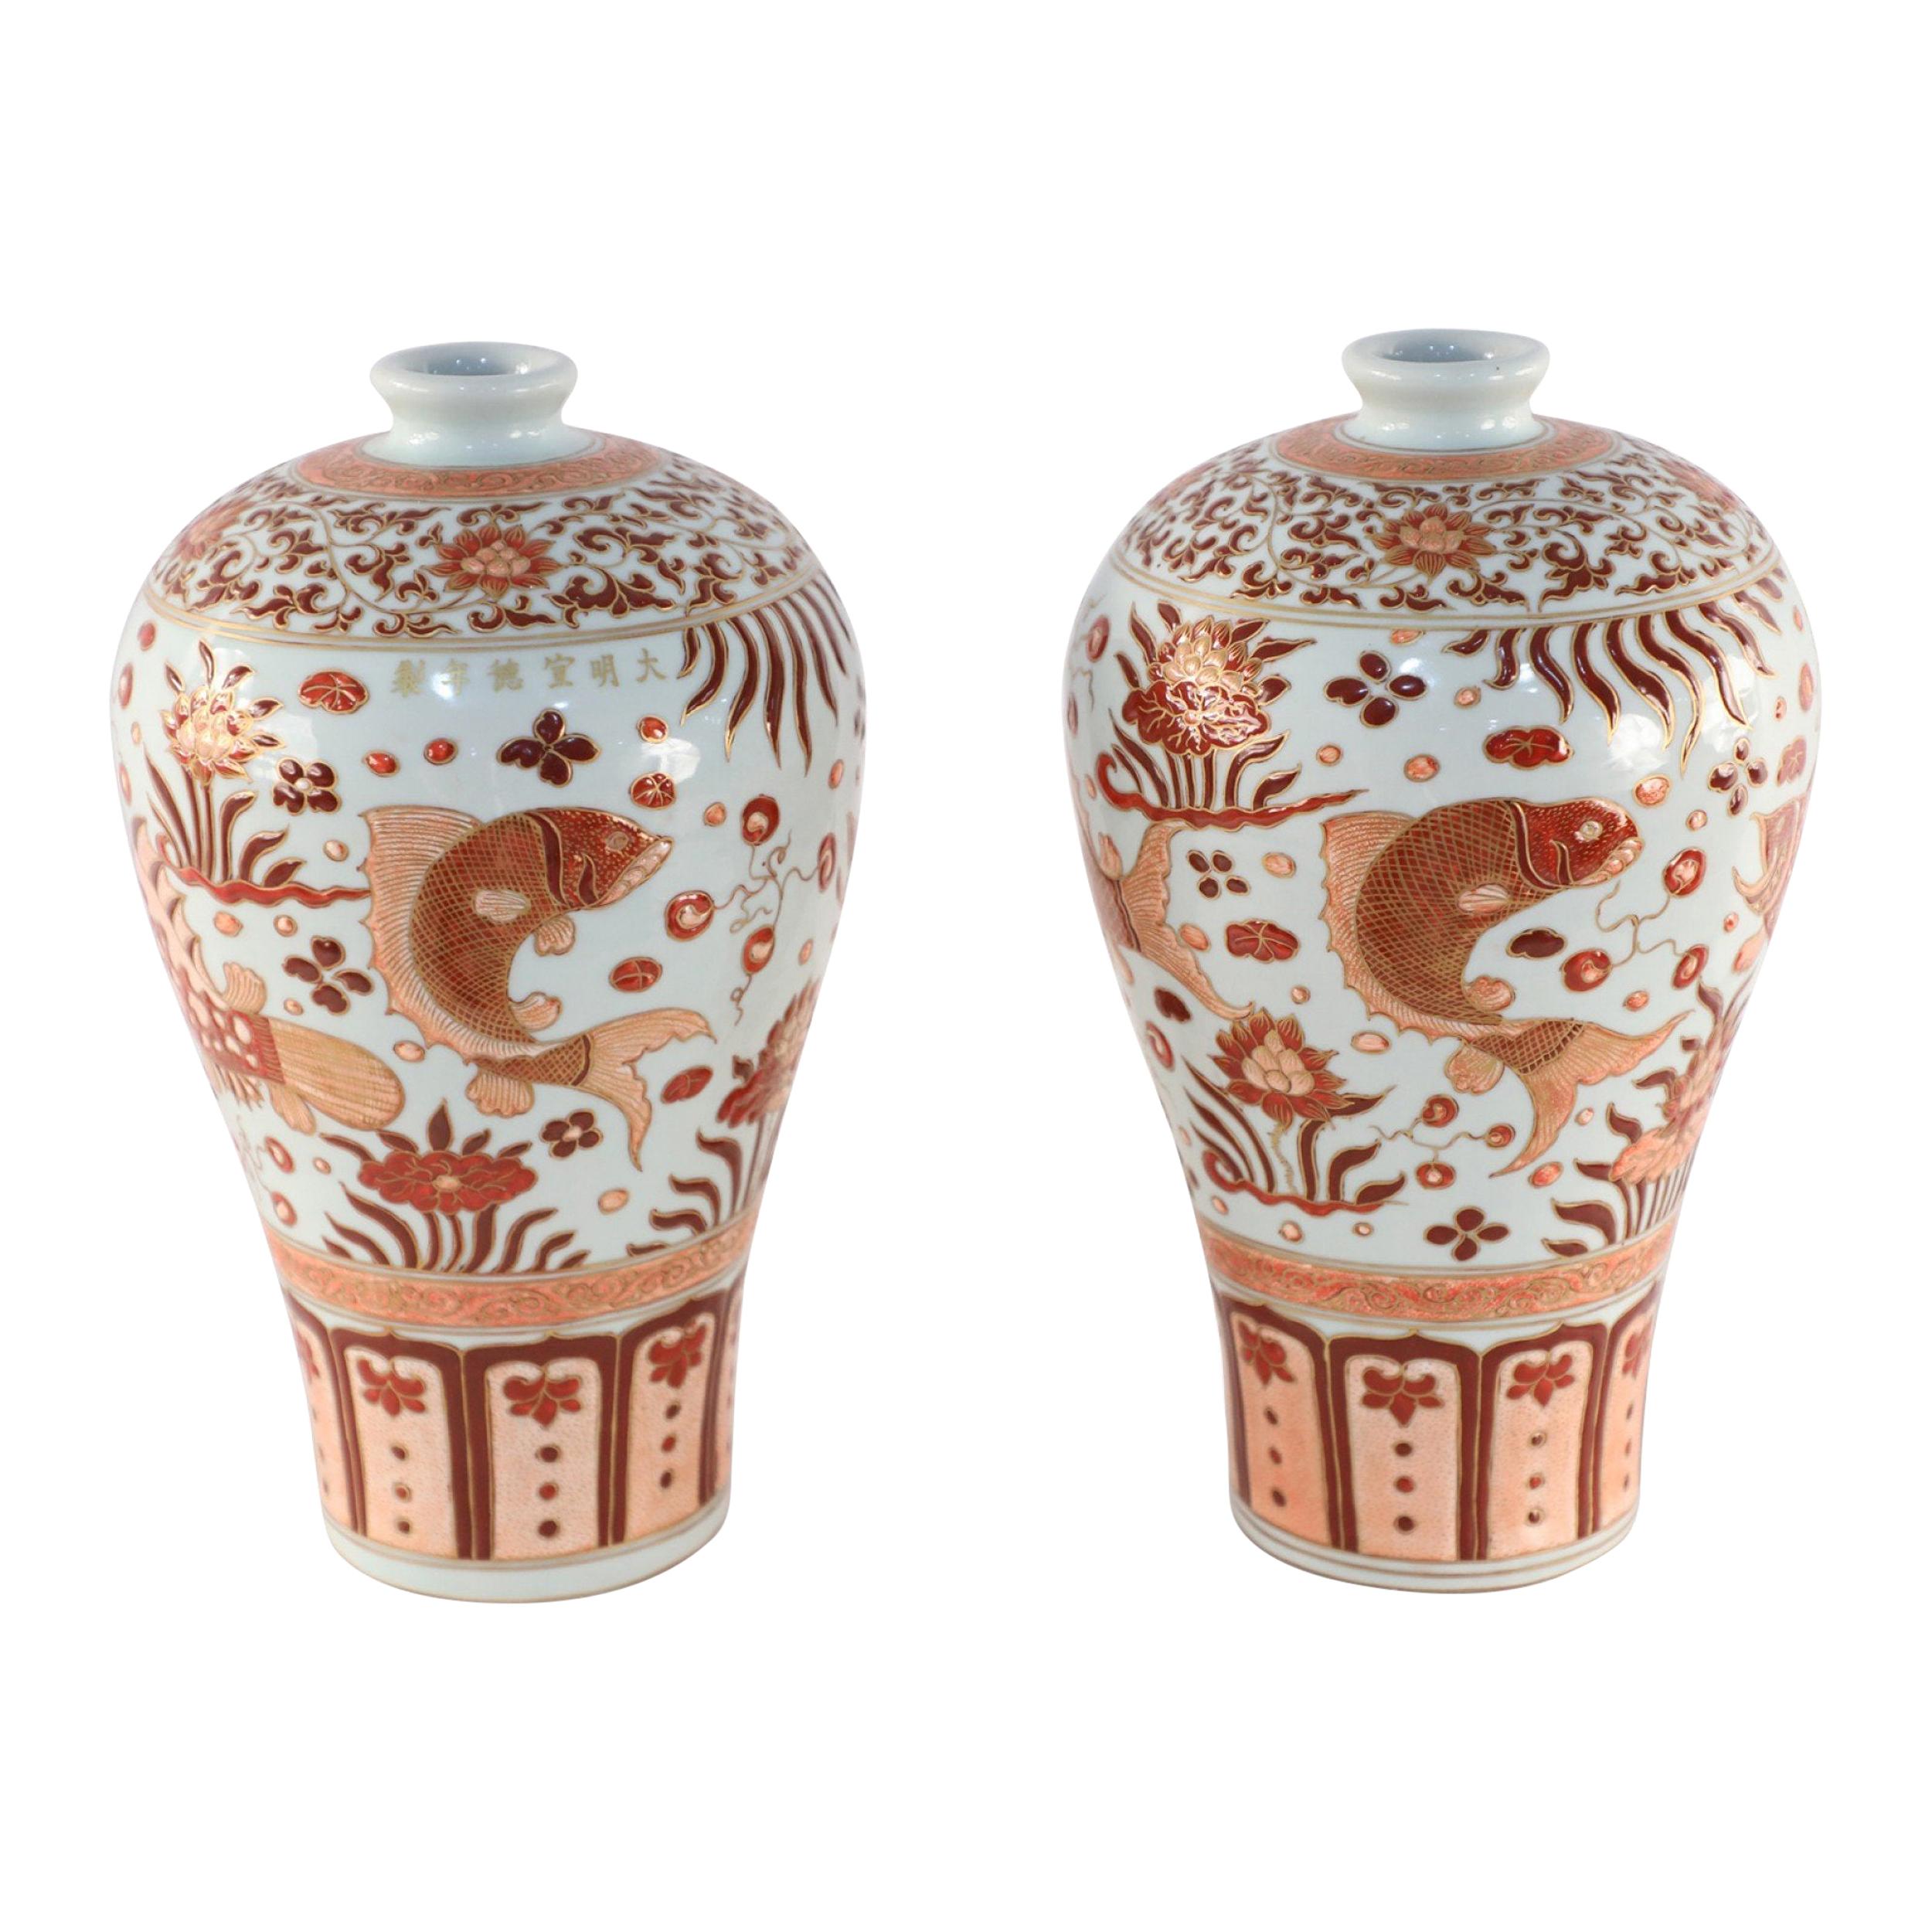 Pair of Chinese Beige and Orange Fish Design Meiping Porcelain Vases